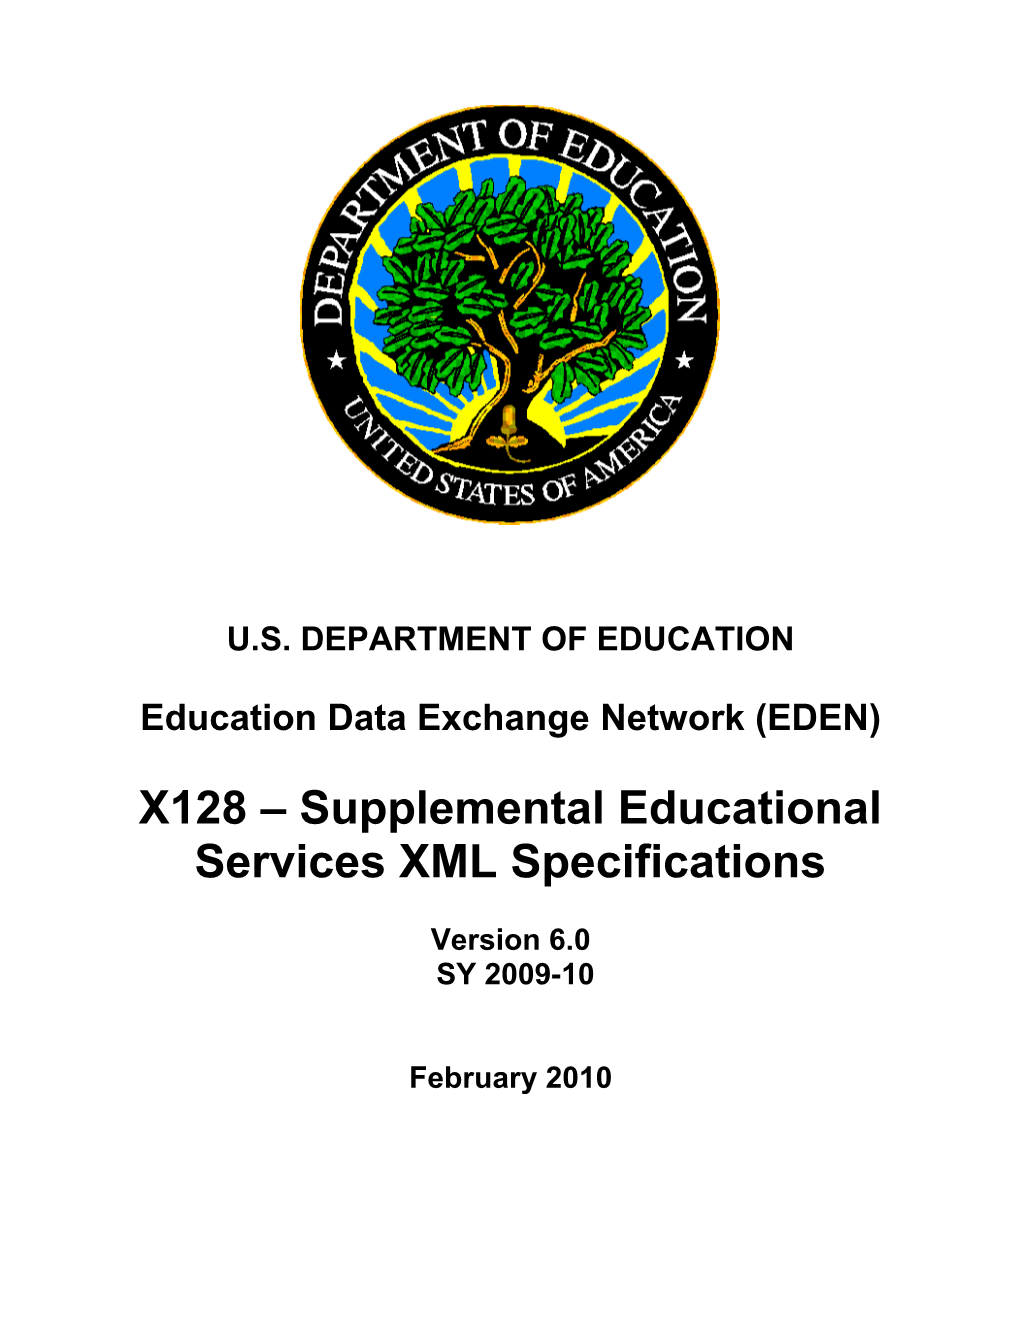 Supplemental Educational Services XML Specifications